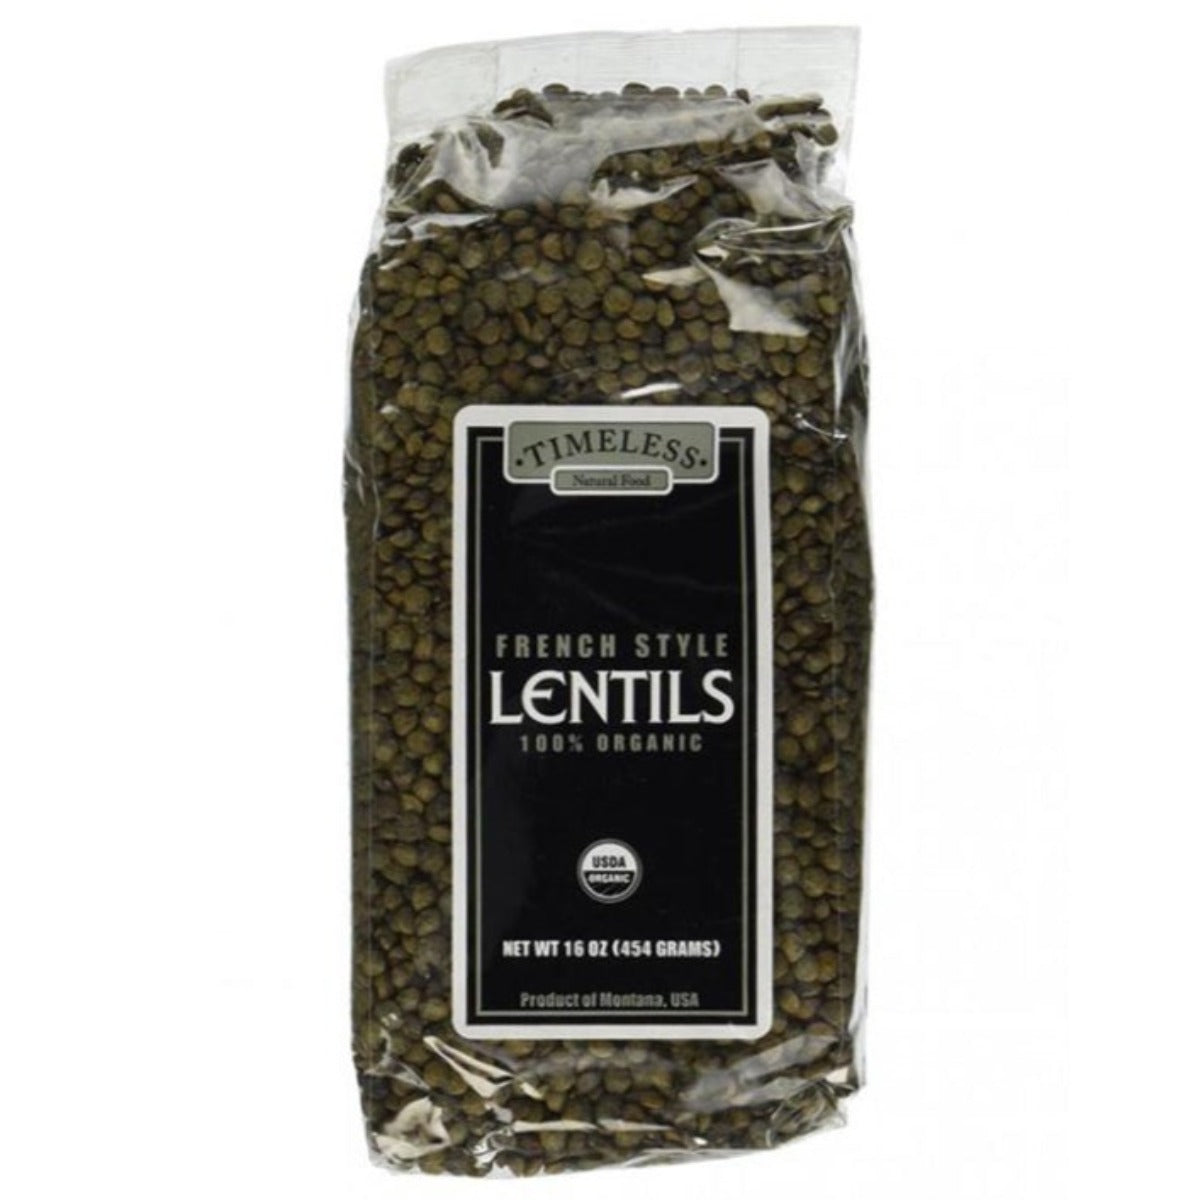 Lentils - French Green - Organic - Timeless Natural Food